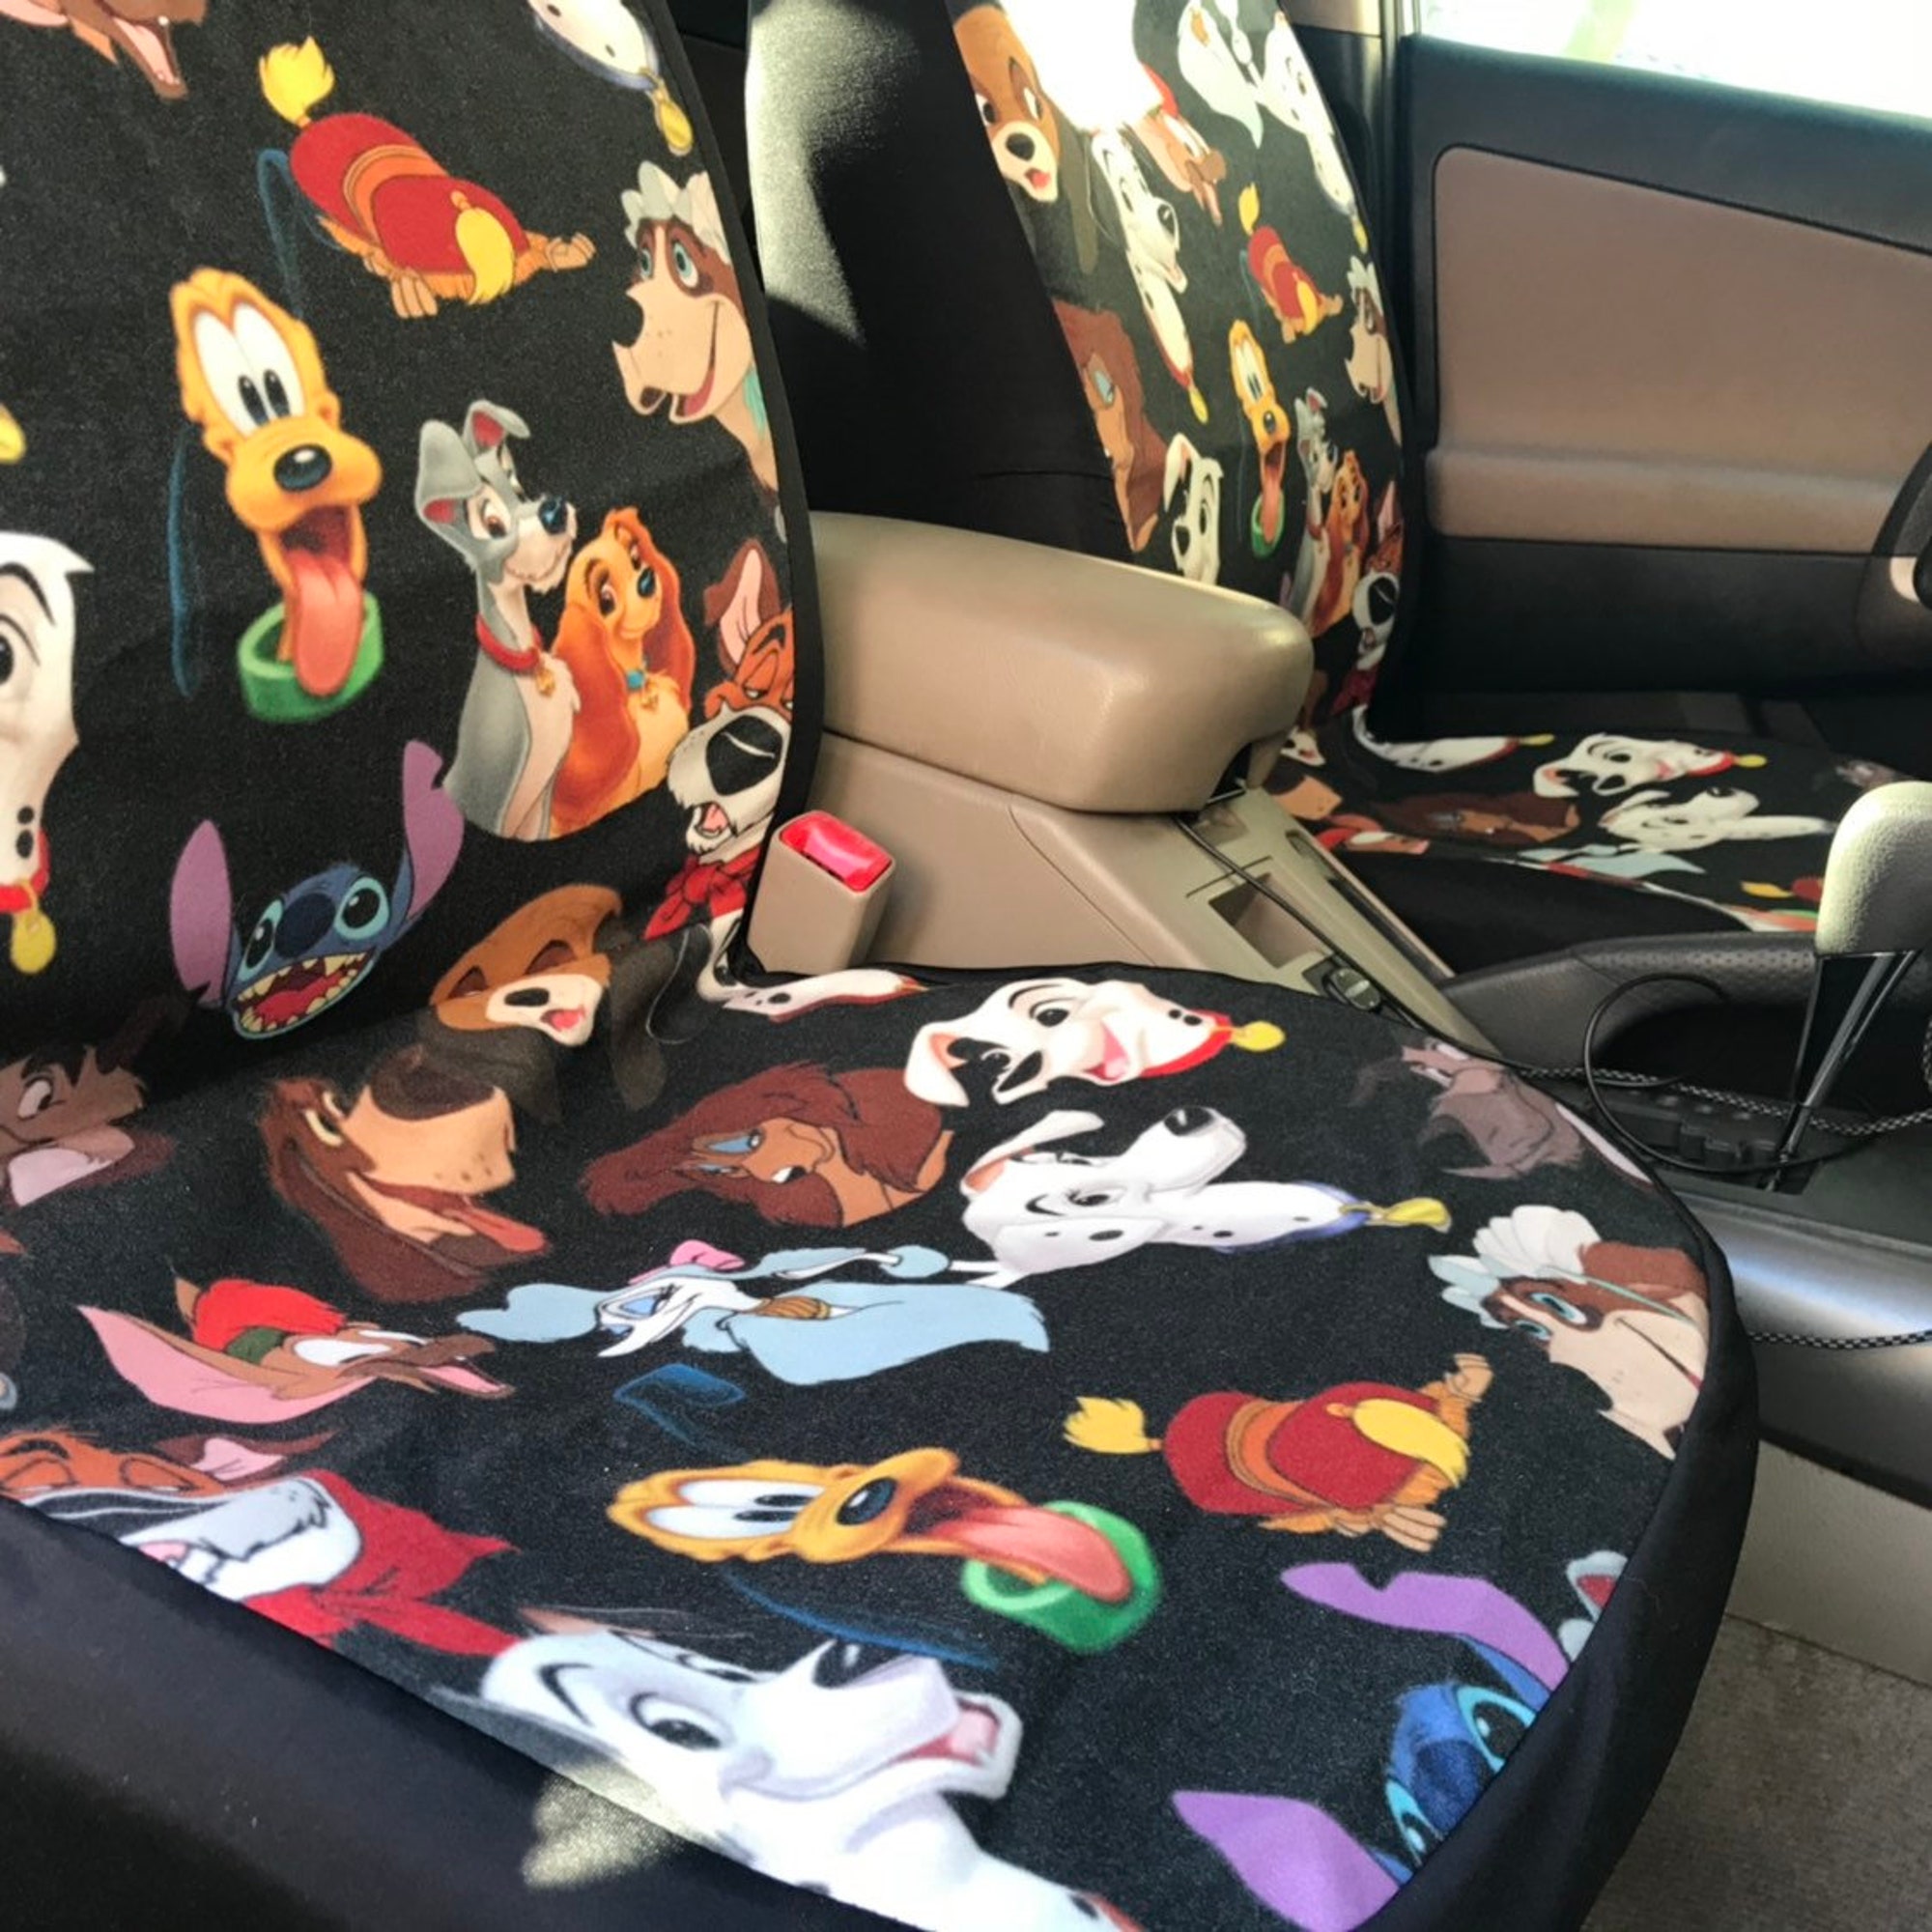 Disney Dogs Car Seat Covers